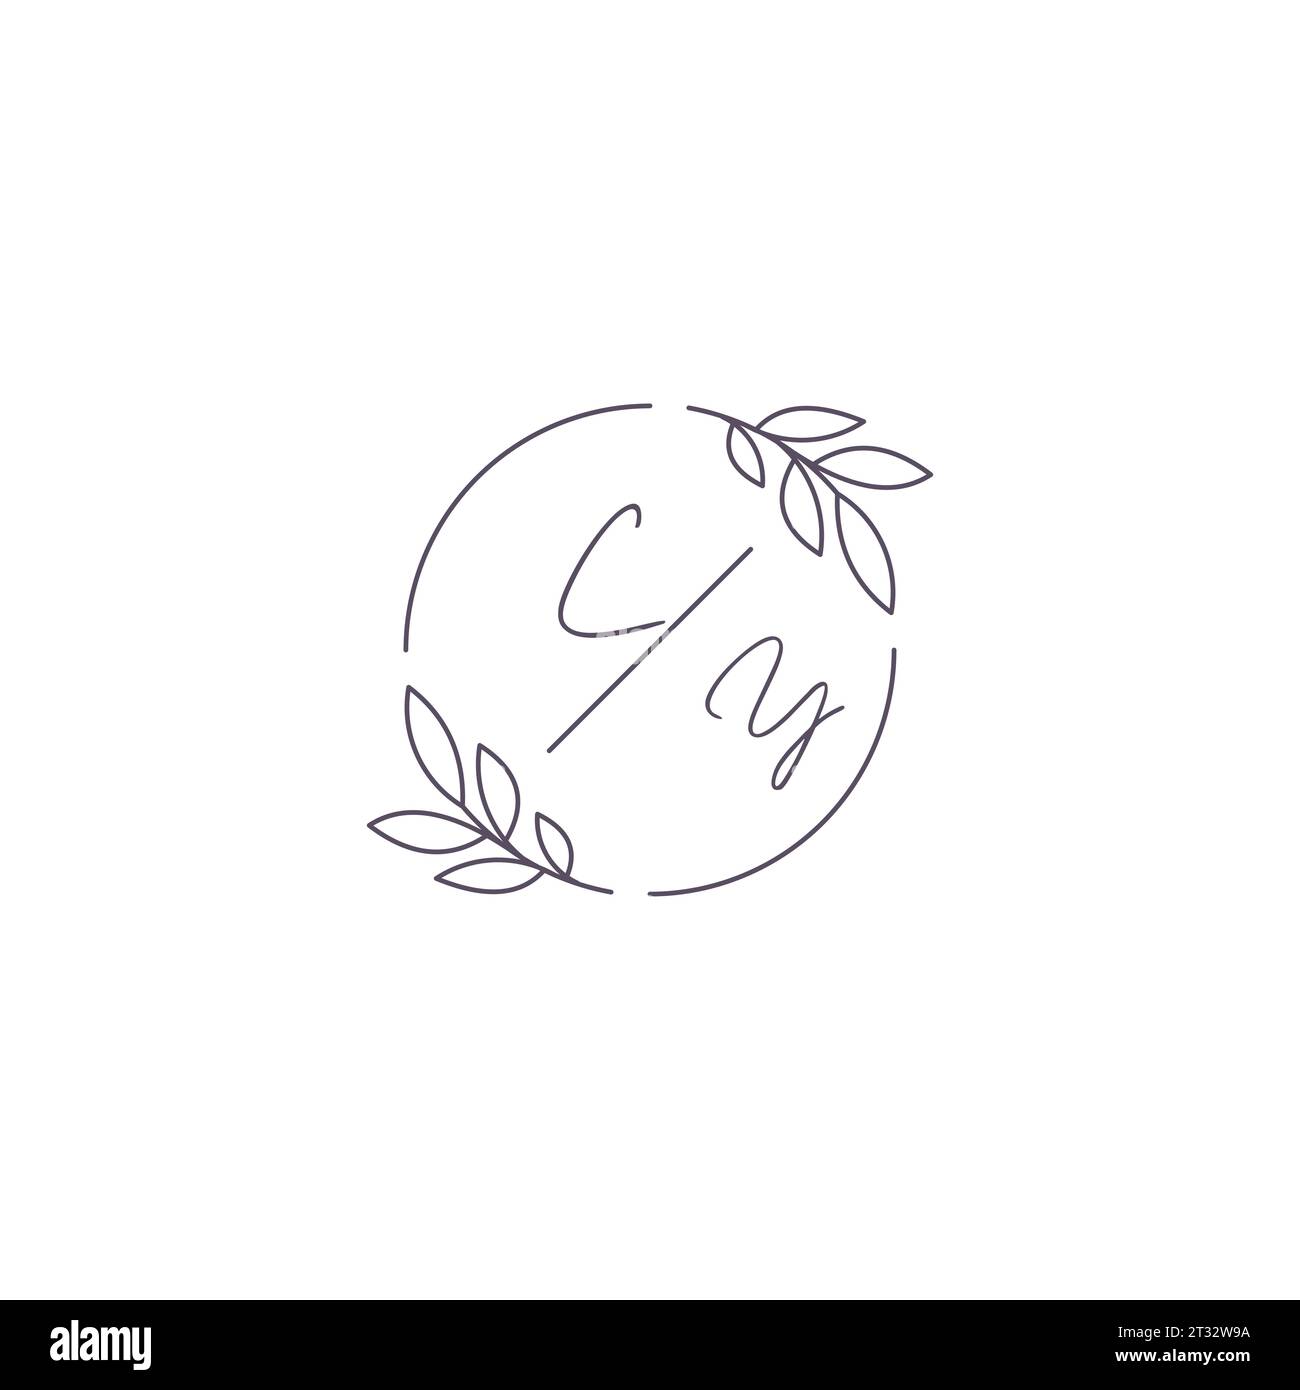 Initials CY monogram wedding logo with simple leaf outline and circle style vector graphic Stock Vector